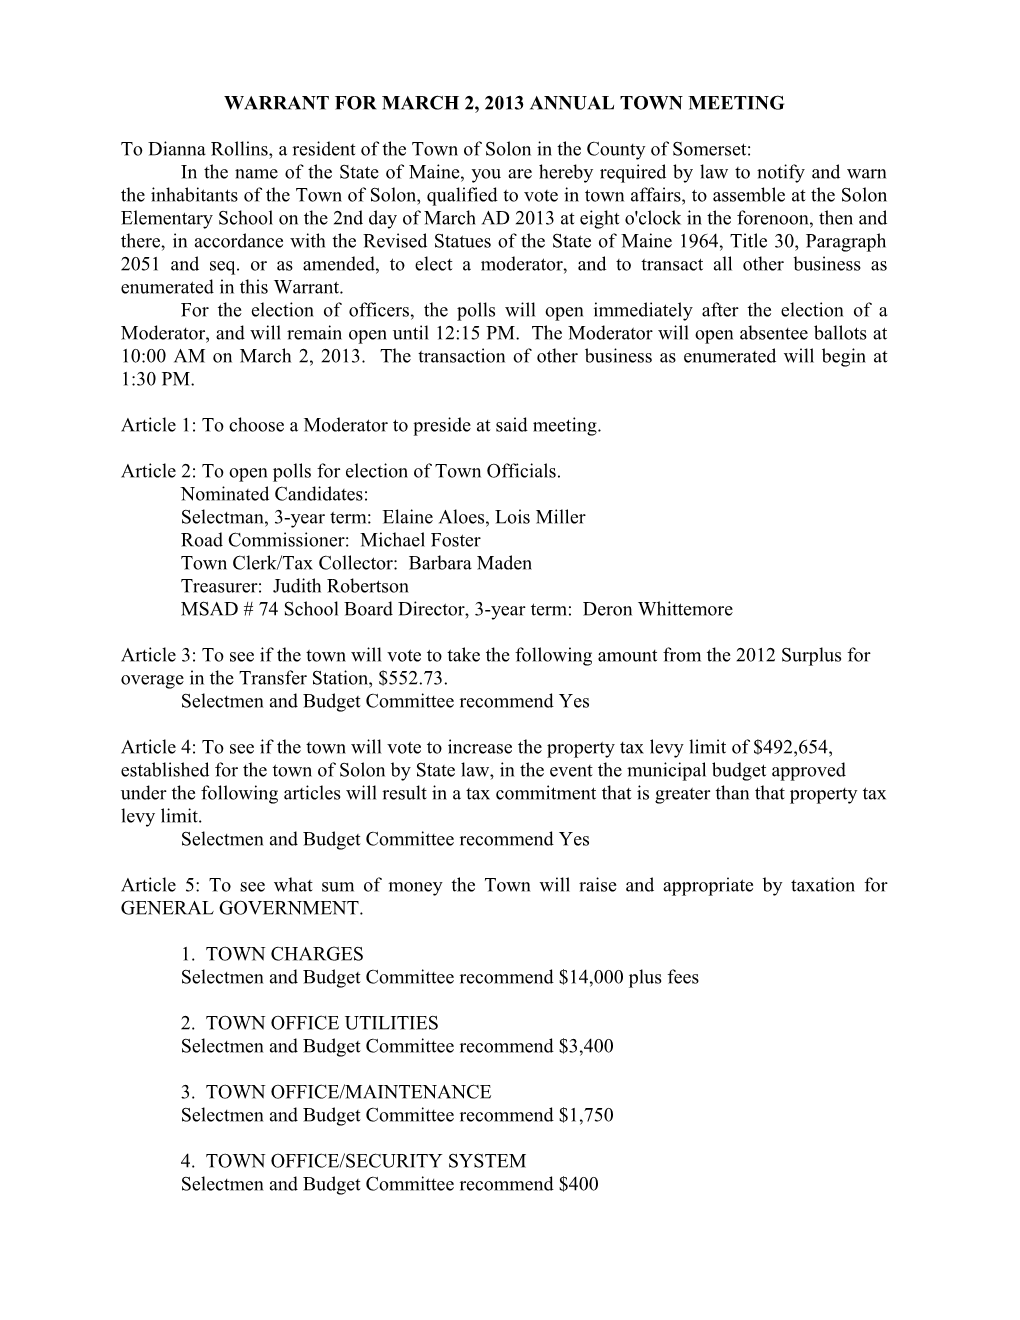 Warrant for March 2, 2013 Annual Town Meeting